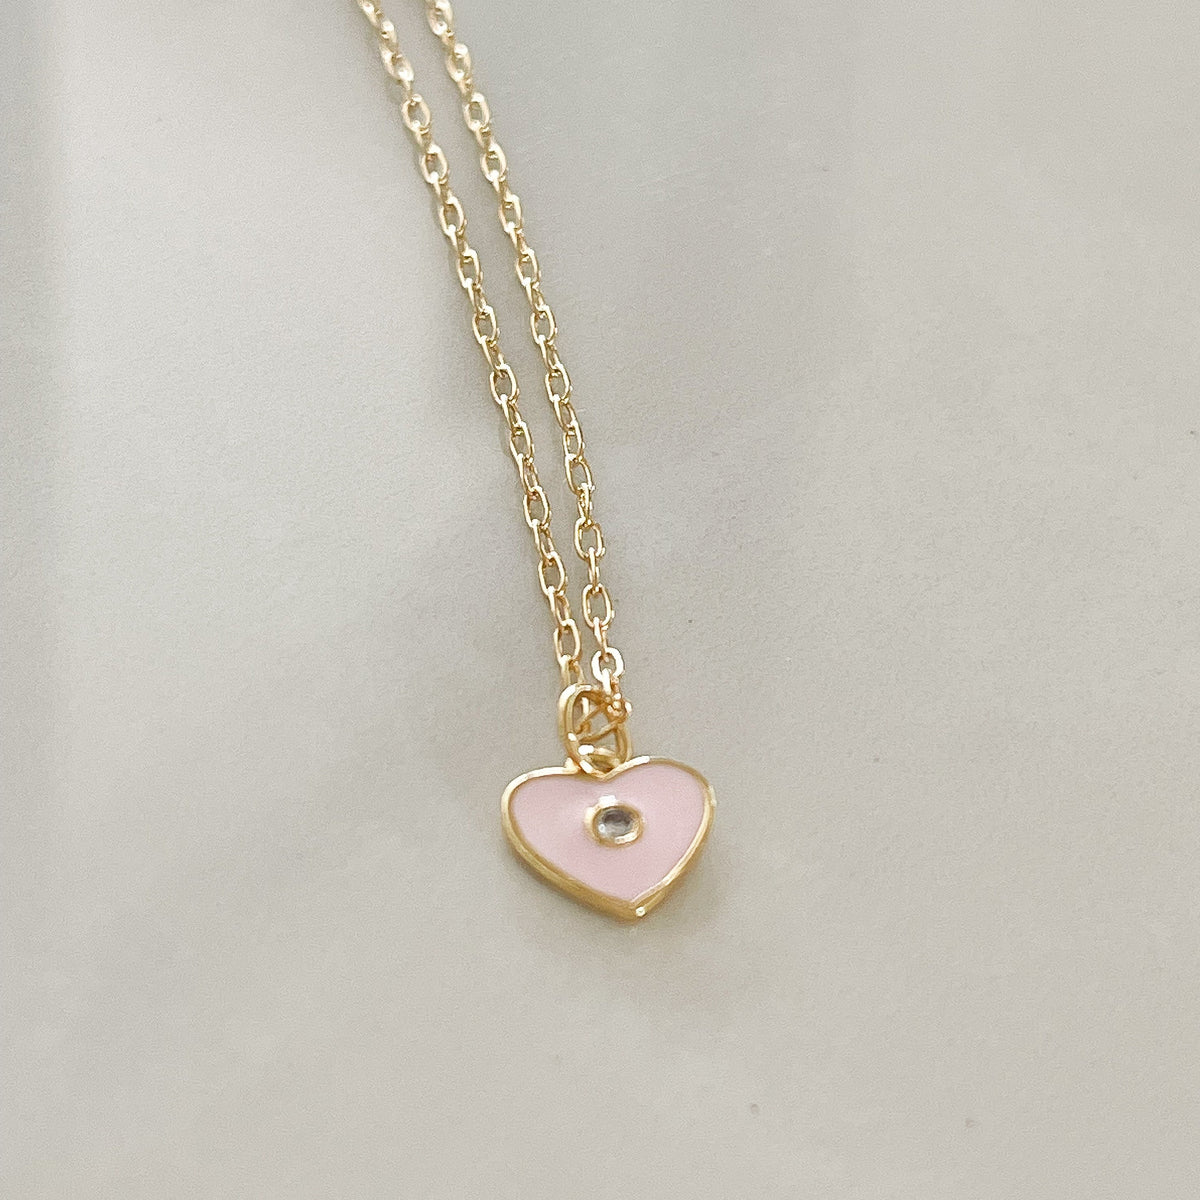 Endless Love Mini Heart Charm Necklace - Pastel Pink